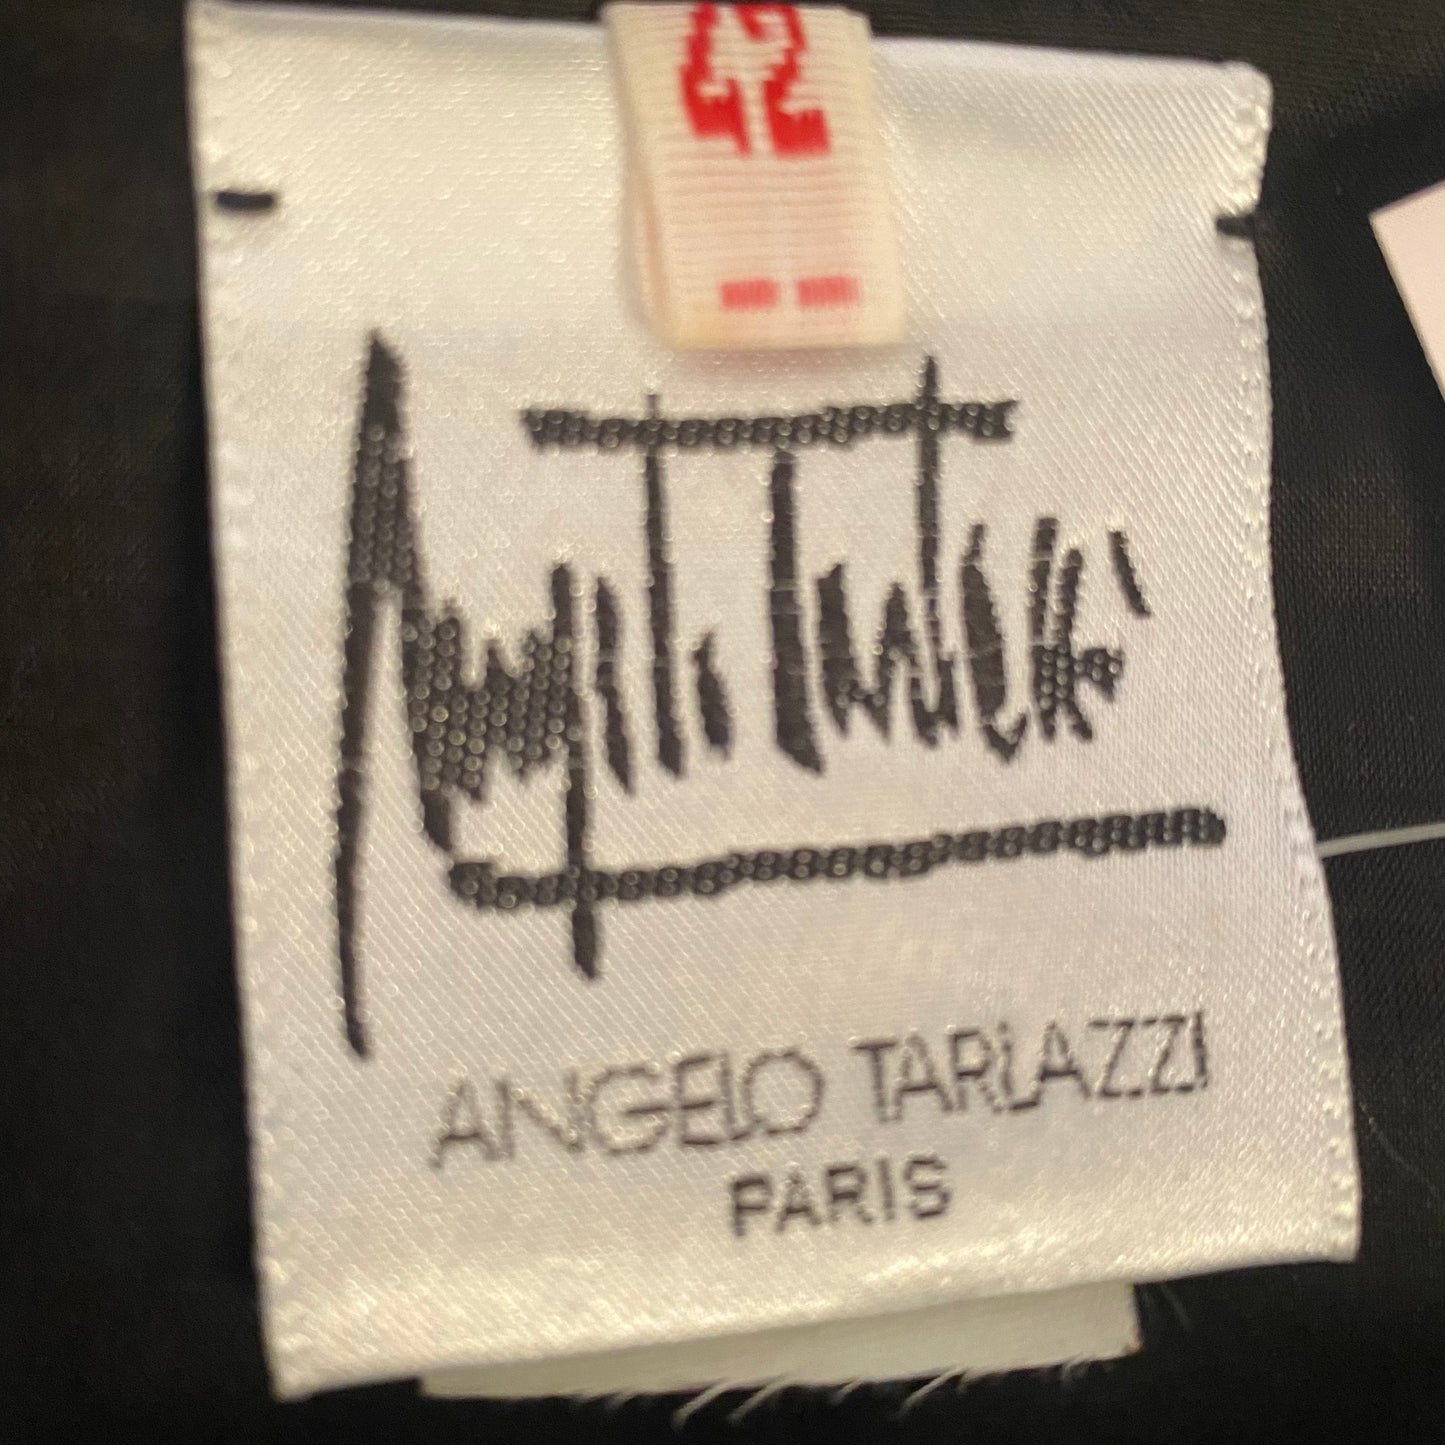 ANGELO TARLAZZI Jackets vintage Lysis Paris pre-owned secondhand